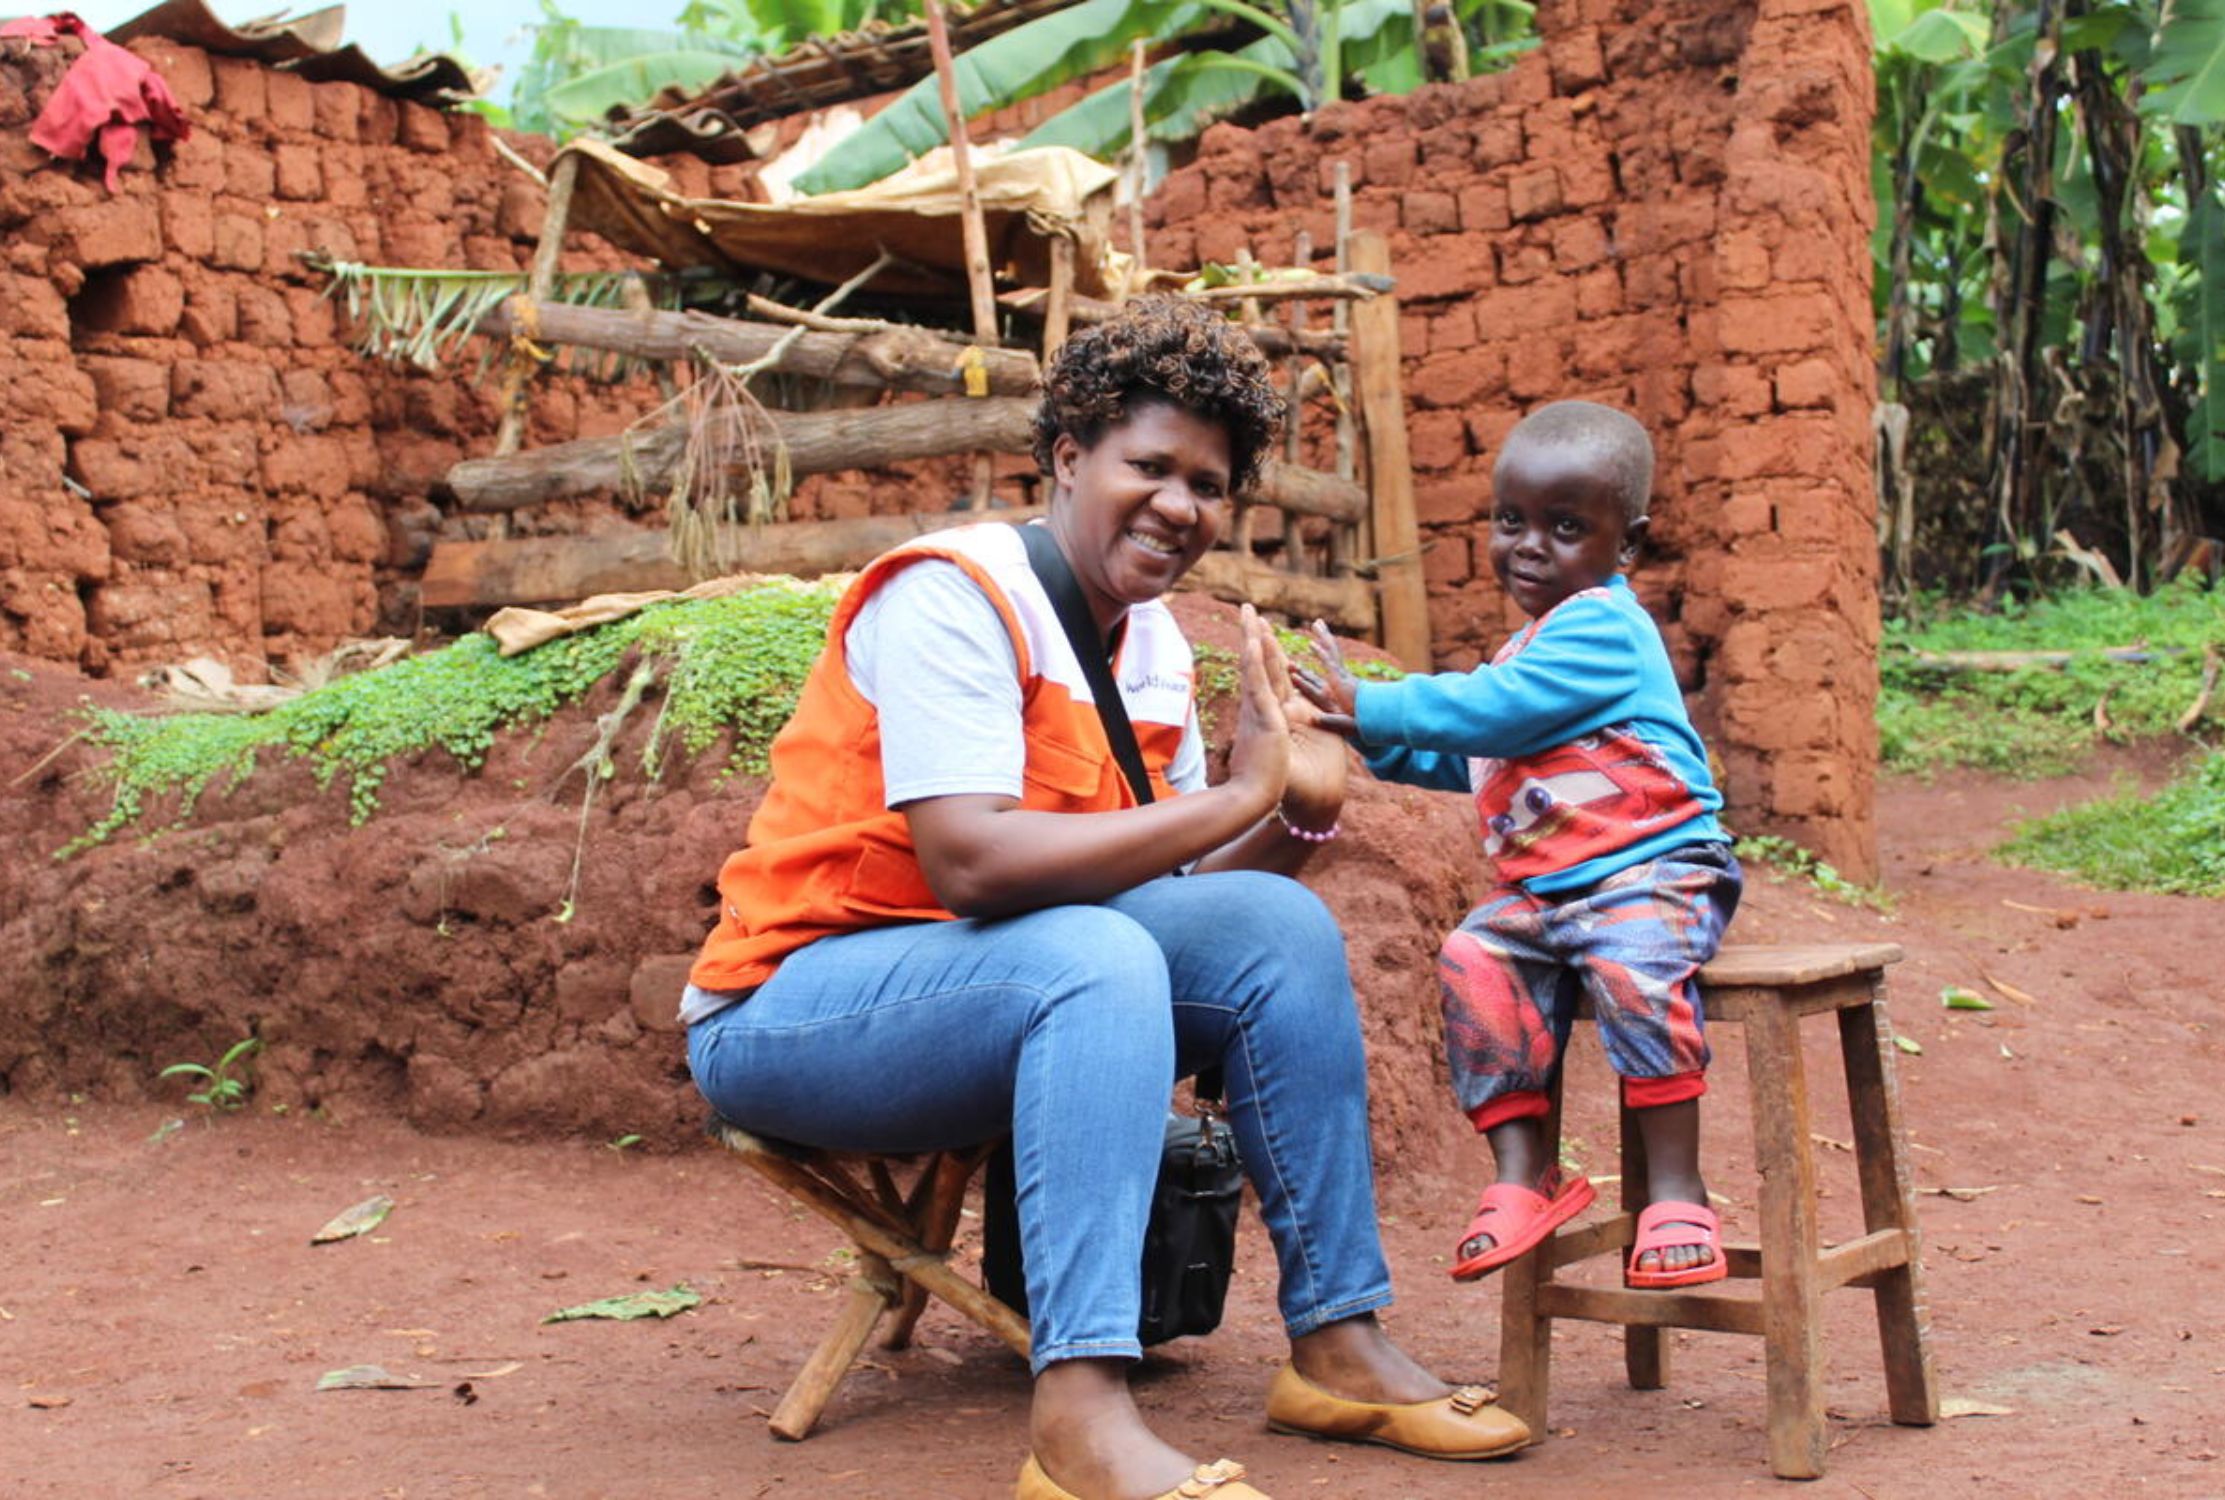 World Vision staff member sat with a smiling child in Burundi